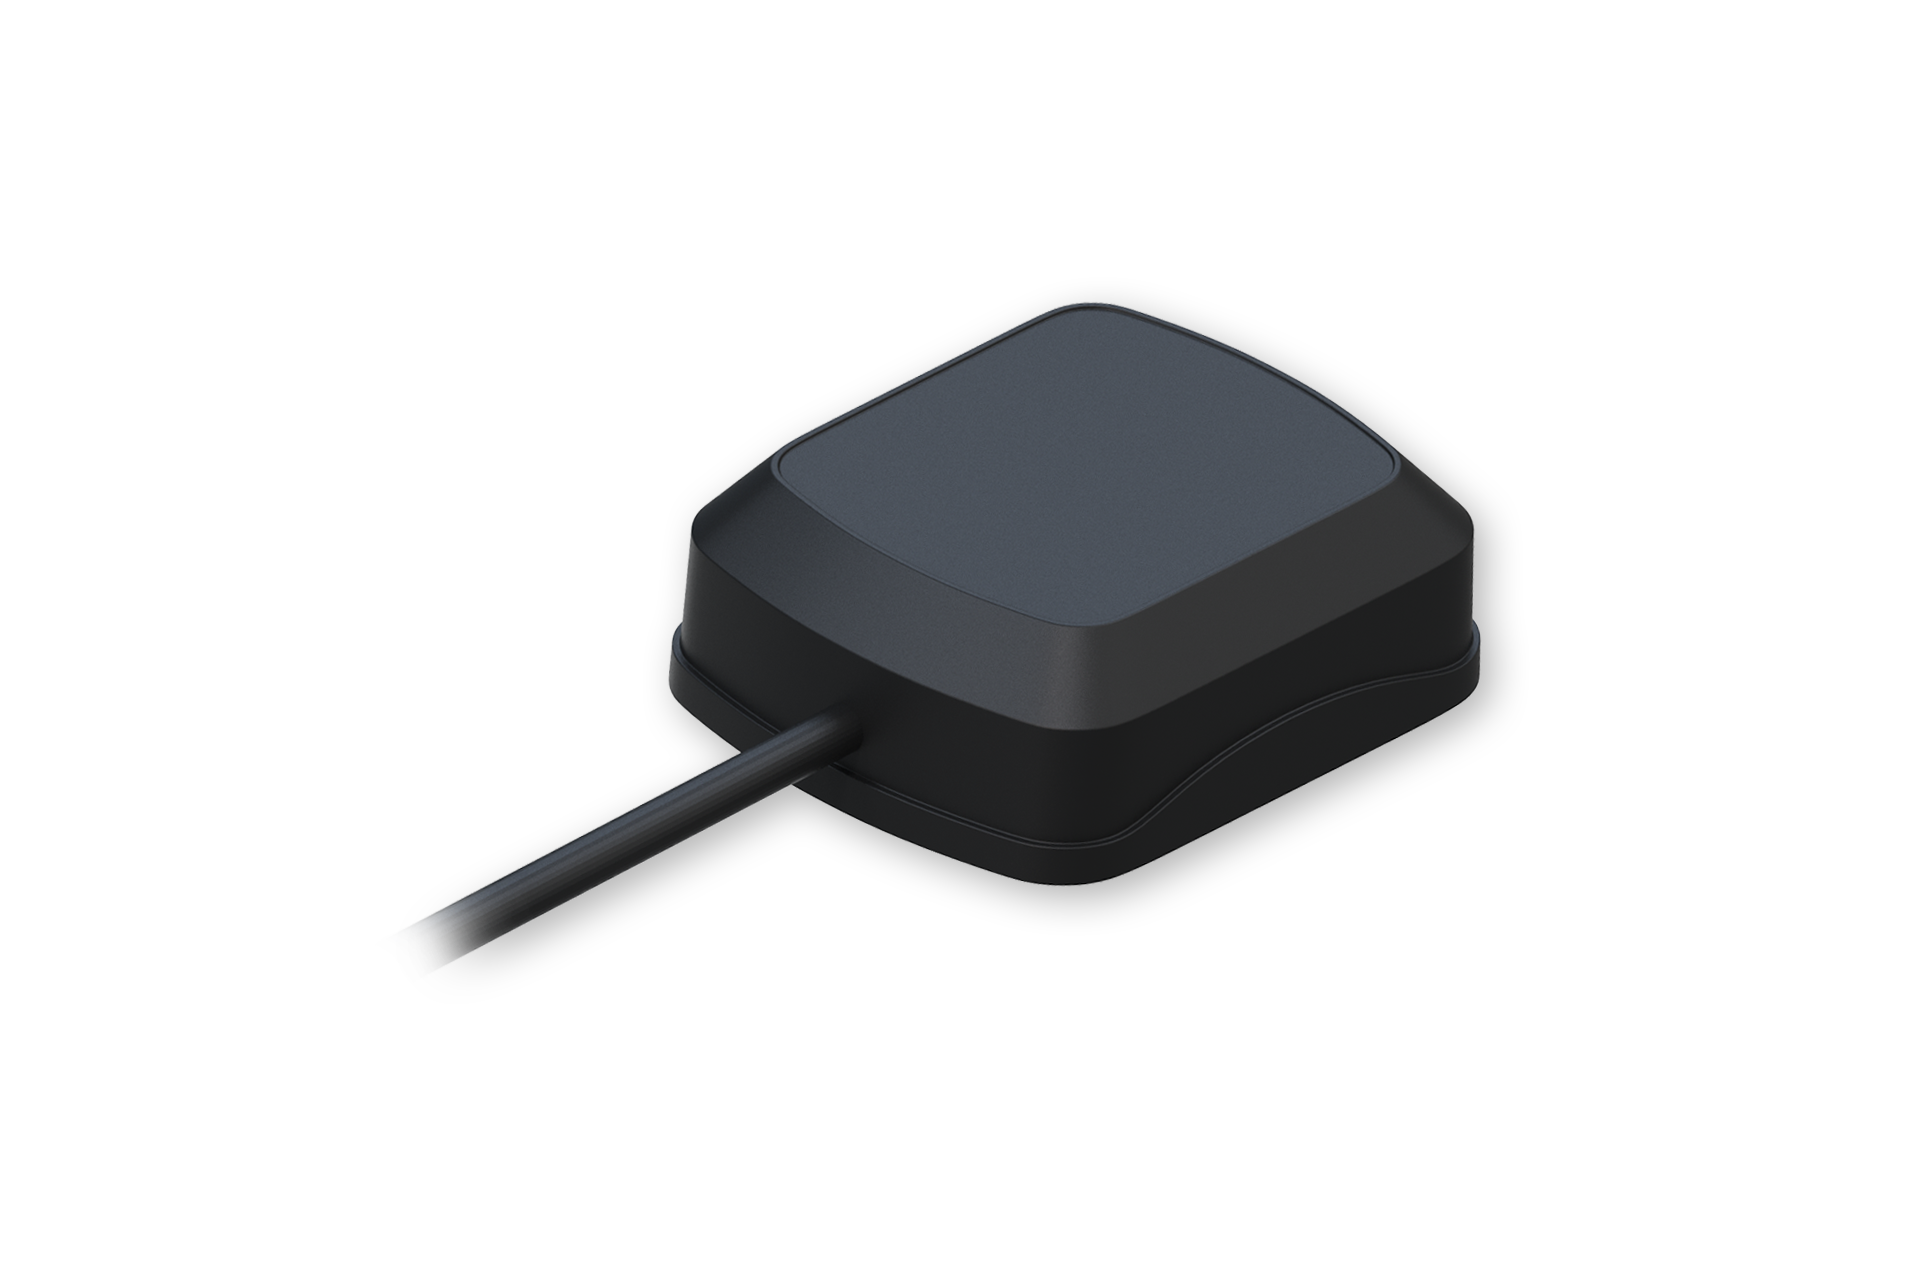 586456-gnss-adhesive-sma-antenna-x2.png